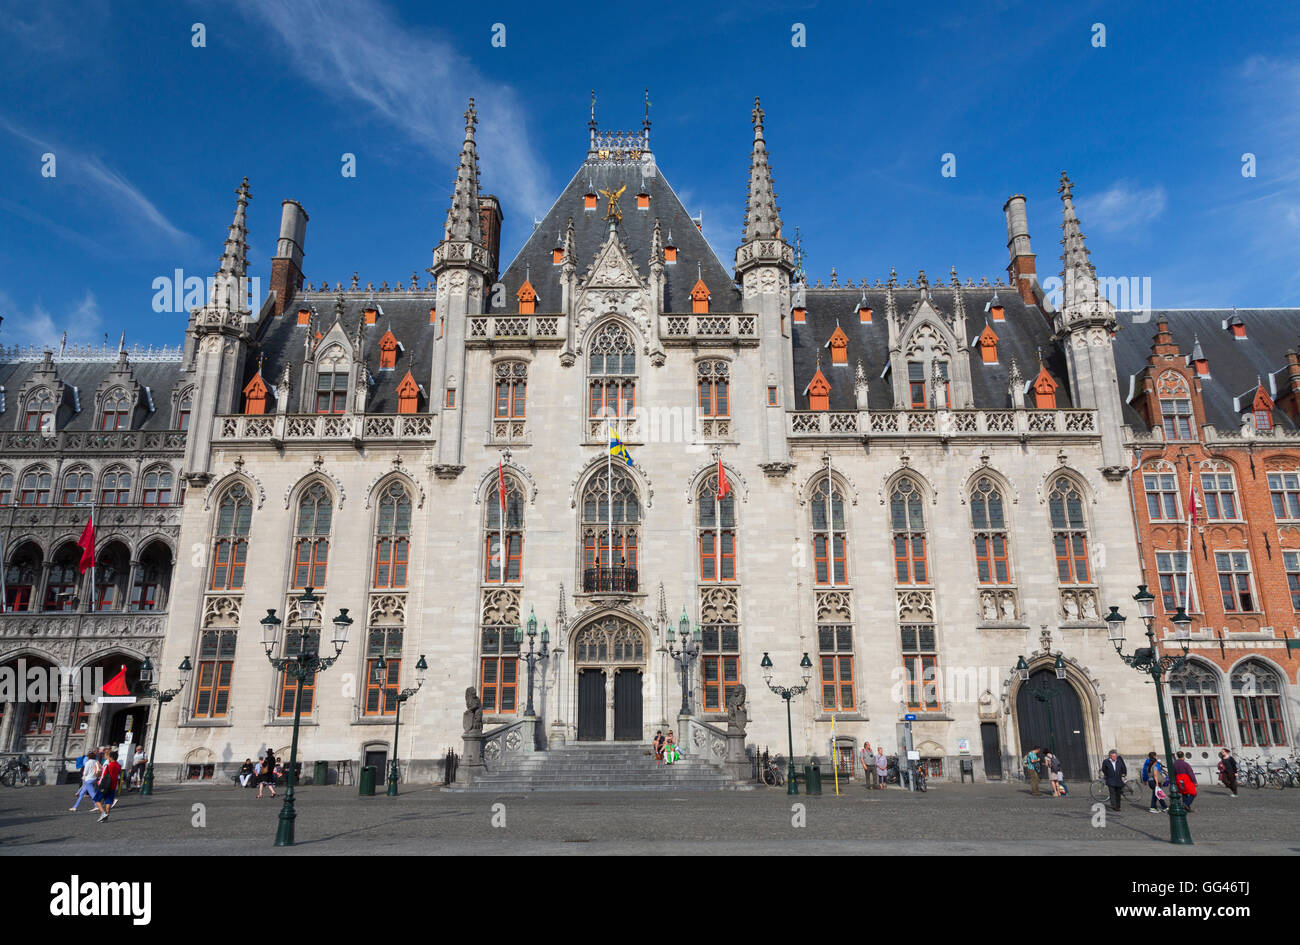 The Provinciaal Hof (Provincial Palace) Markt, Bruges. Stock Photo